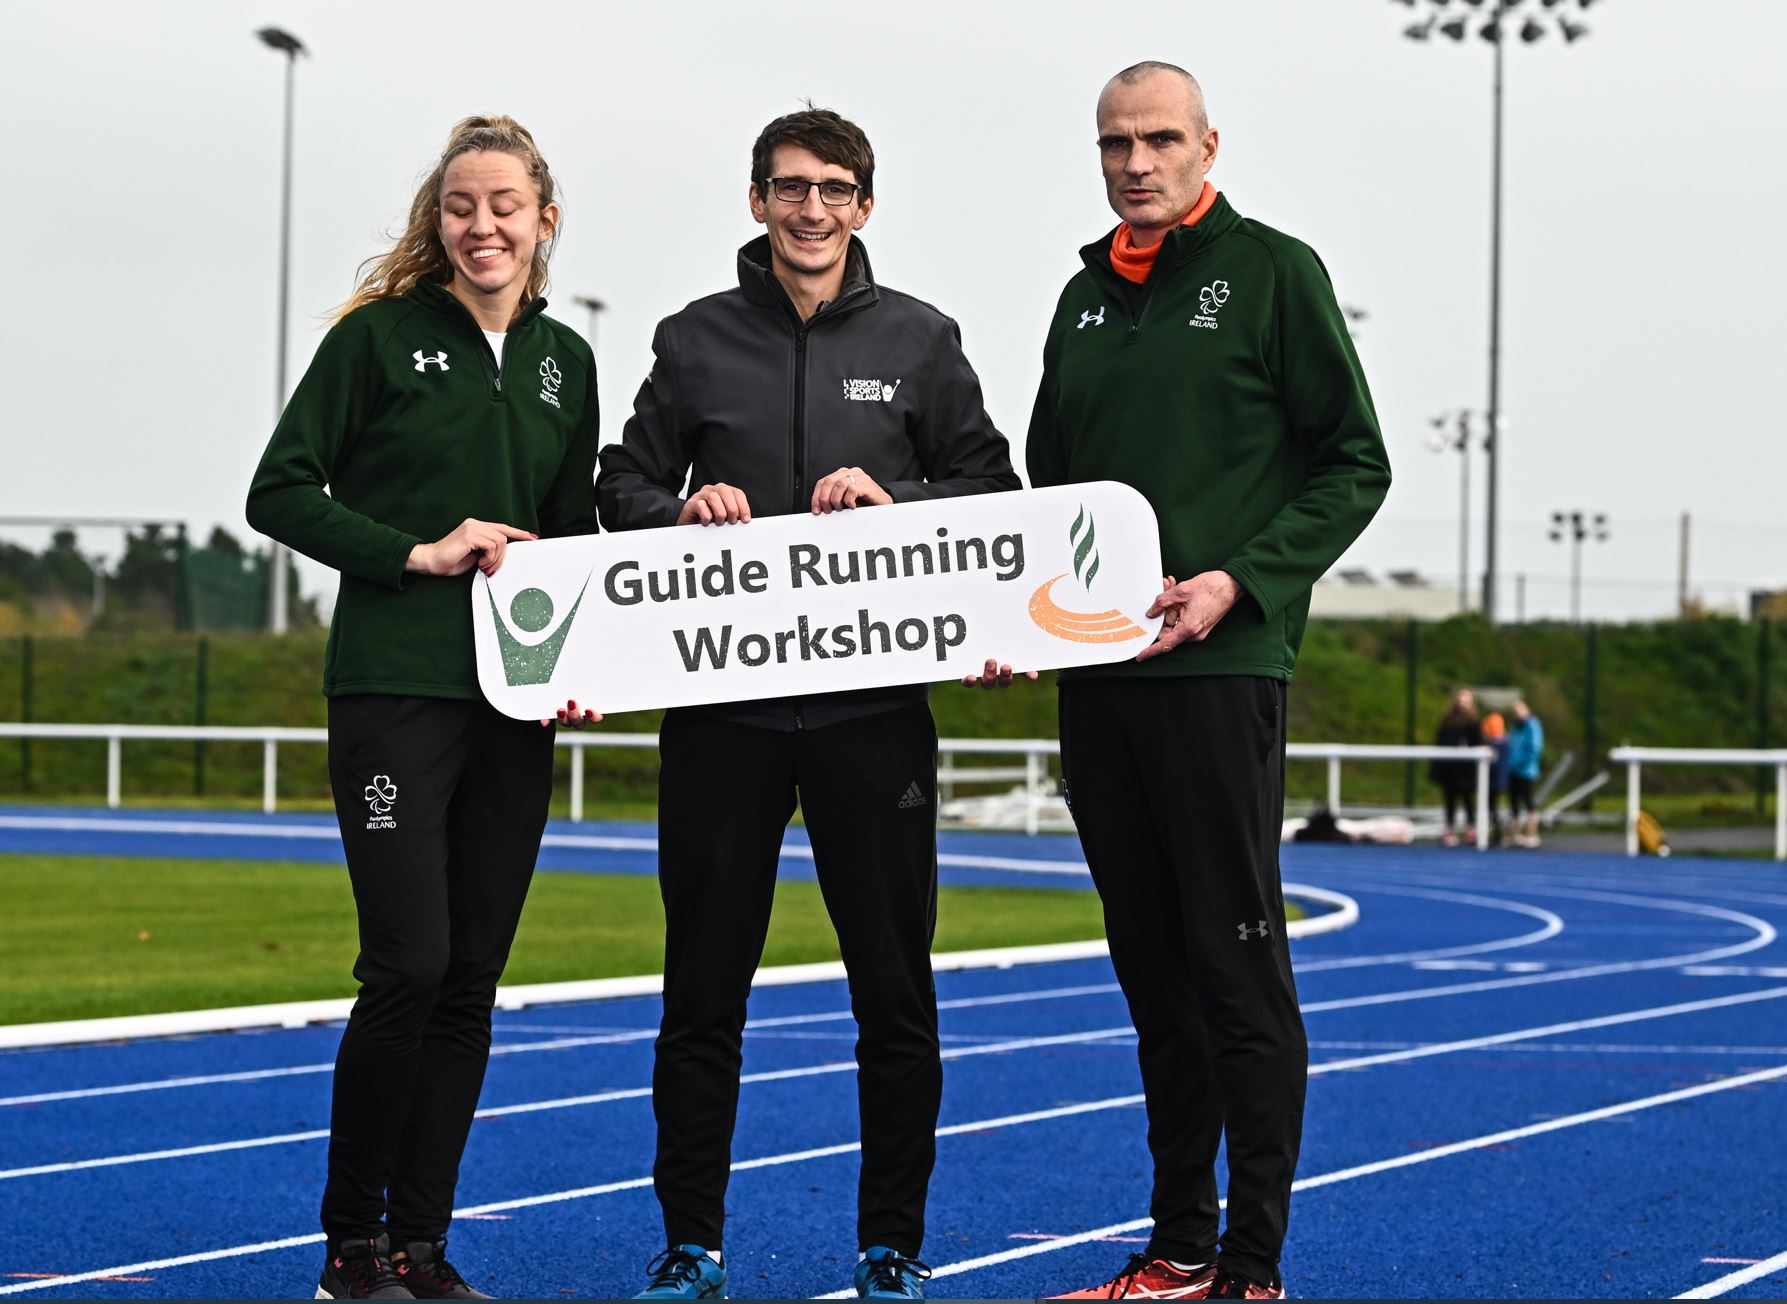 3 people stand on a blue running track holding a white sign saying guide running workshop